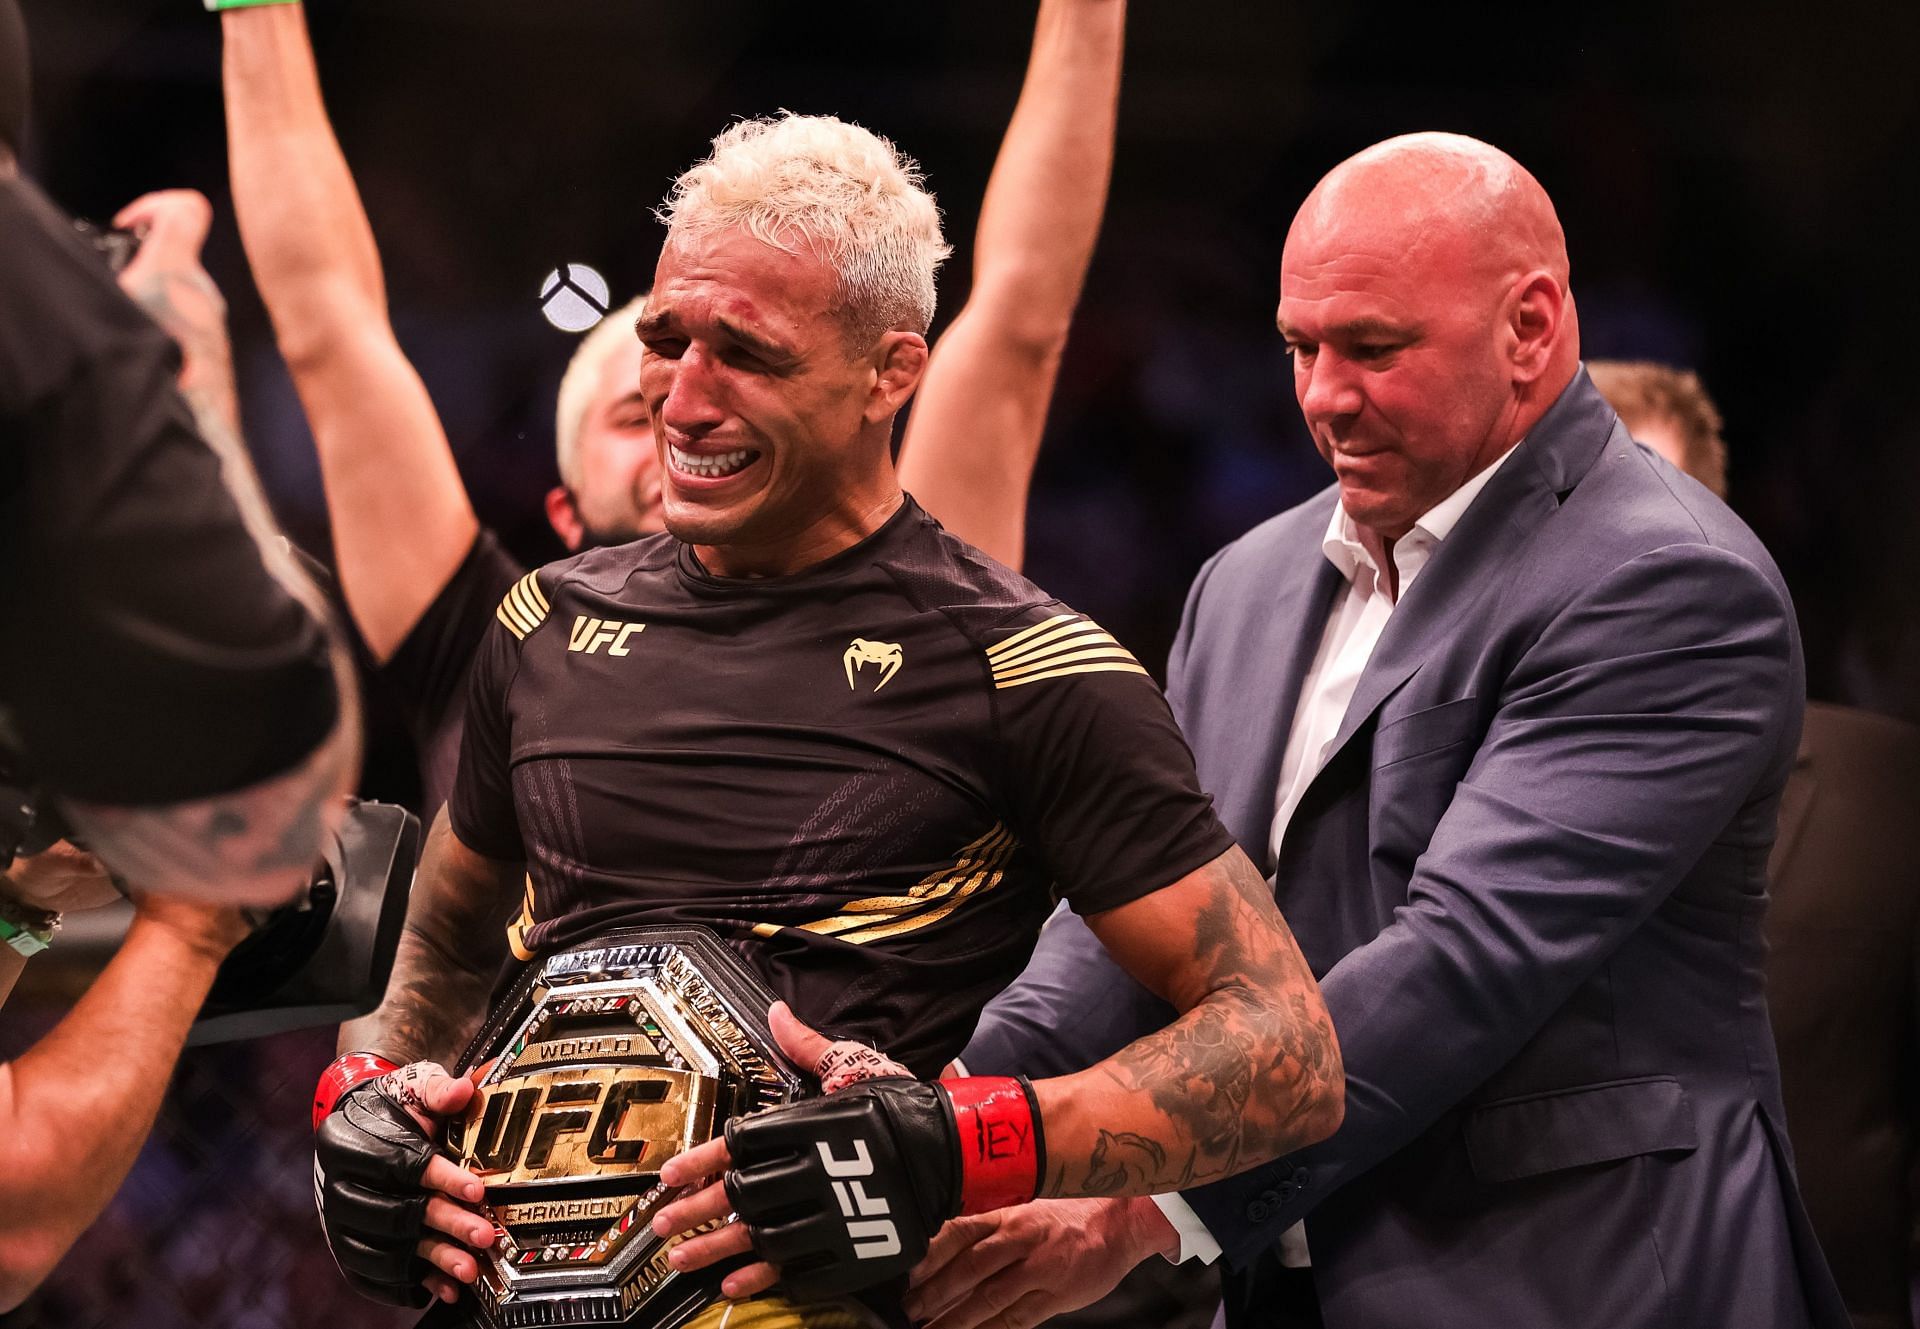 Oliveira finally winning UFC gold was one of the feel-good moments of 2021